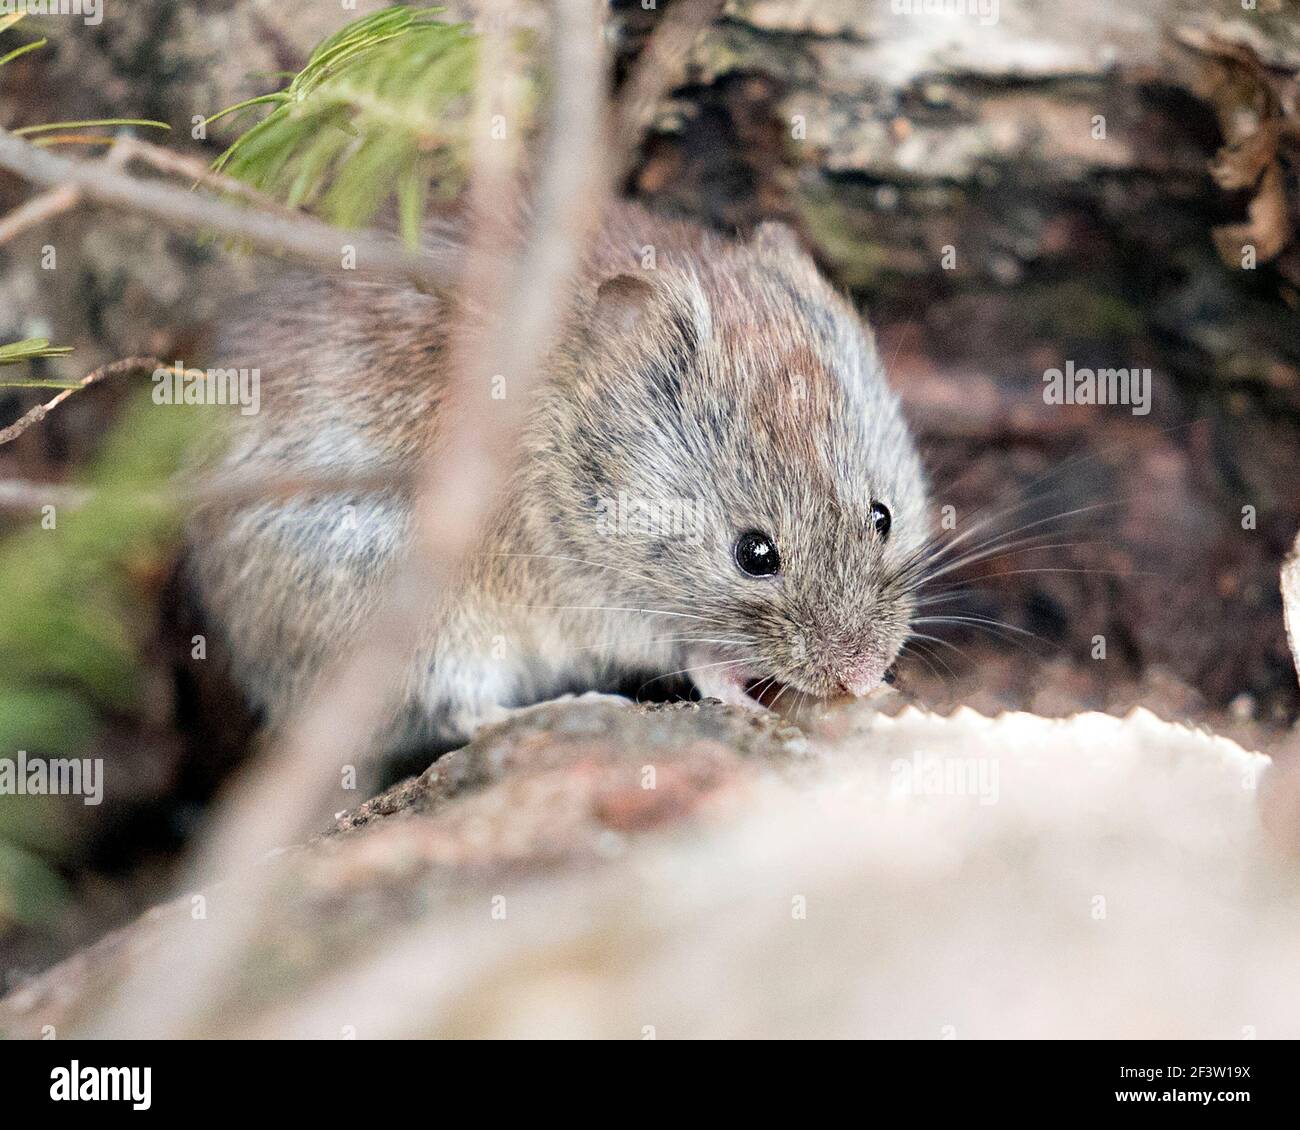 Mouse close-up profile view in the forest eating and looking at camera in its environment and habitat with a blur background displaying brown fur. Stock Photo